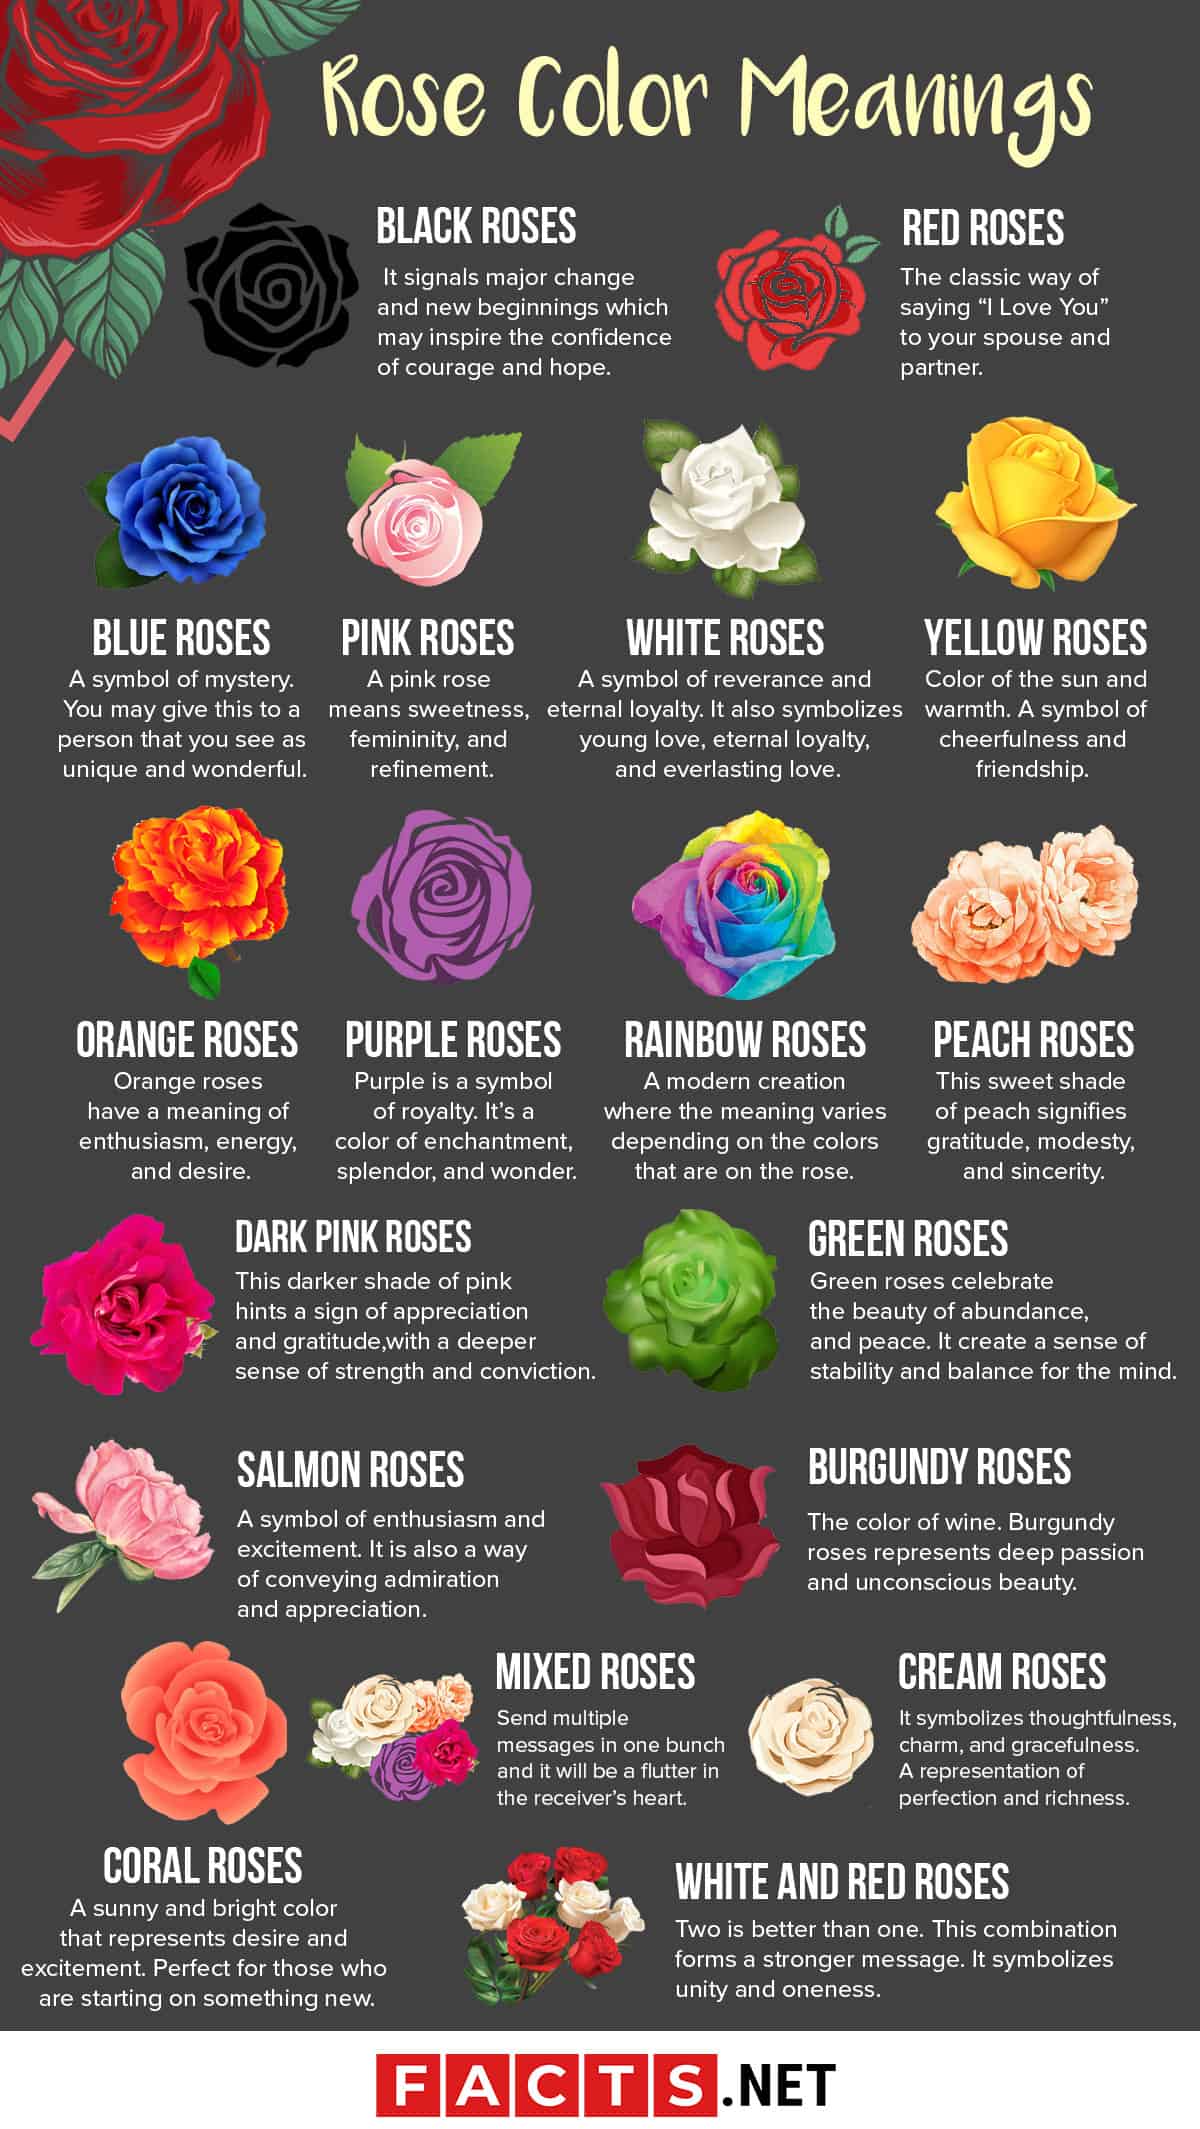 18 Rose Color Meanings That Are Just More Than Romantic | Facts.net